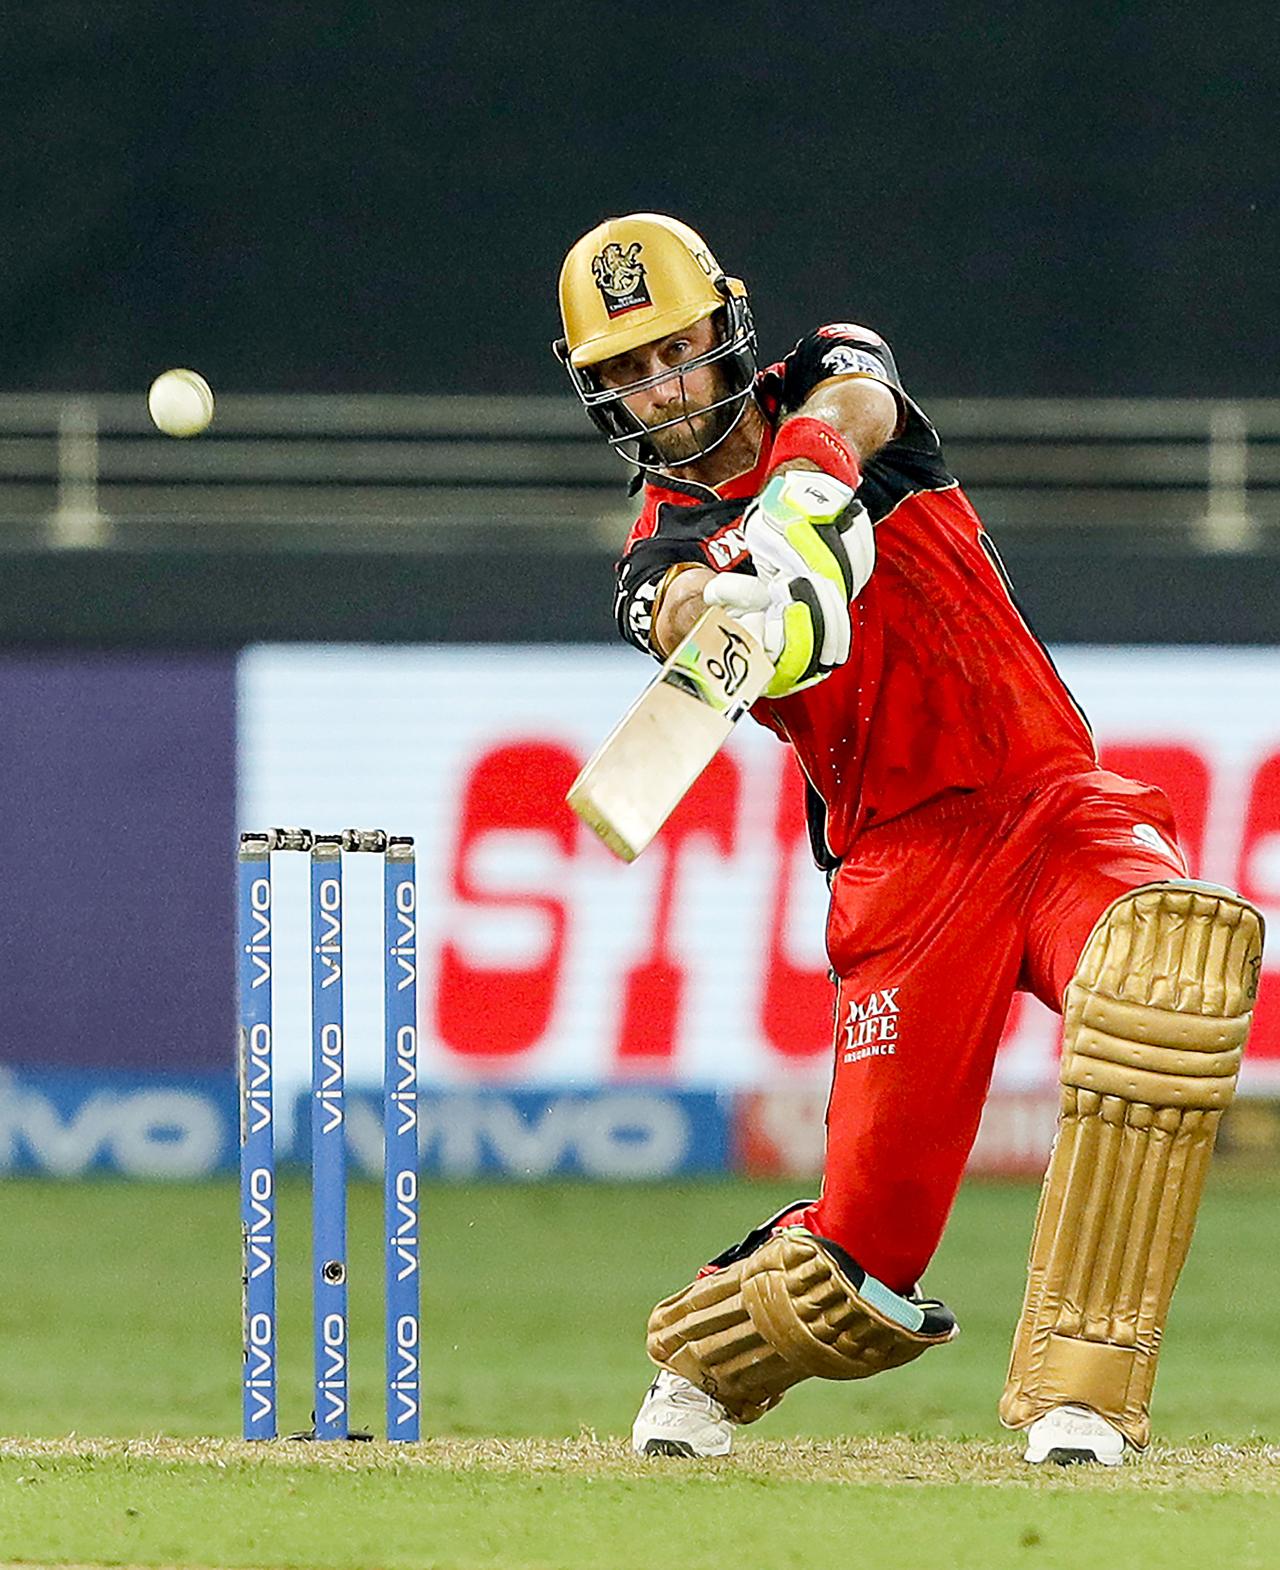 Royal Challengers Bangalore's hard-hitter Glenn Maxwell smashed an unbeaten fifty runs off just 30 balls chasing RR's total of 150. Chahal too stepped up in the earlier half of the match to help RCB bag a win